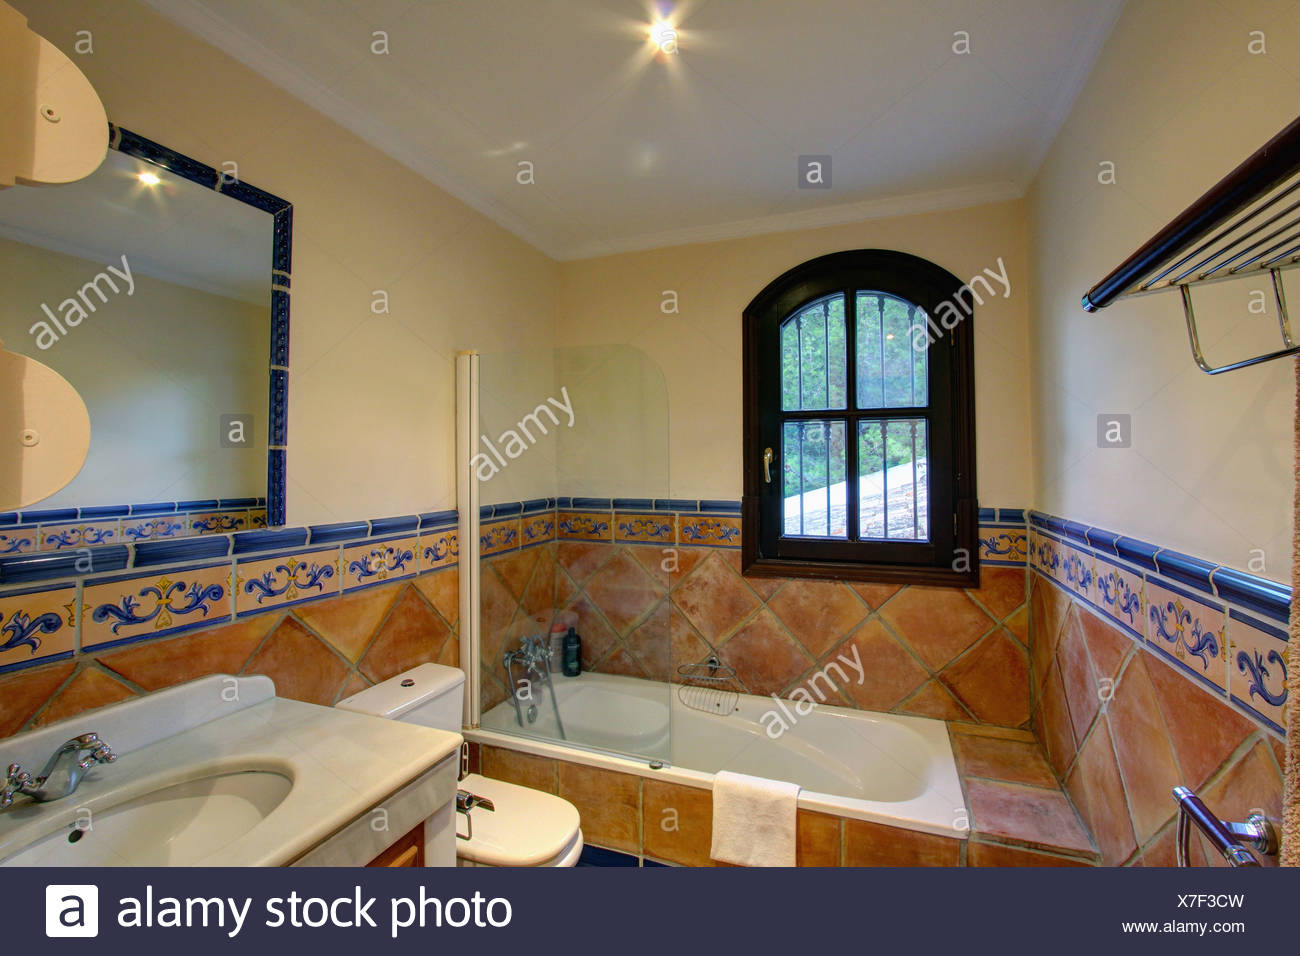 Window Above Bath In Spanish Bathroom With Traditional Terracotta